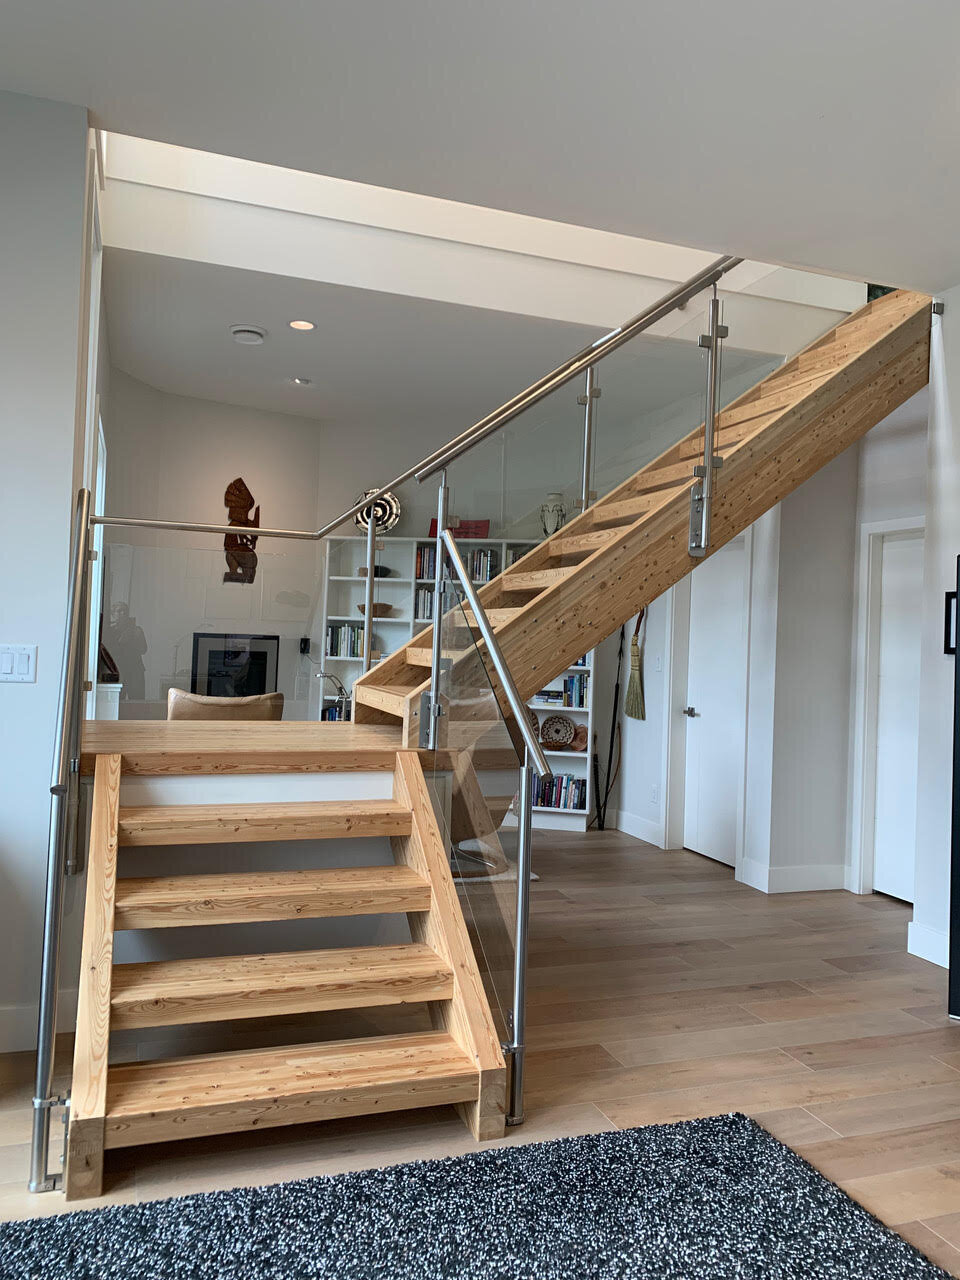 Modern stairwell design with hardwood and steel railings.